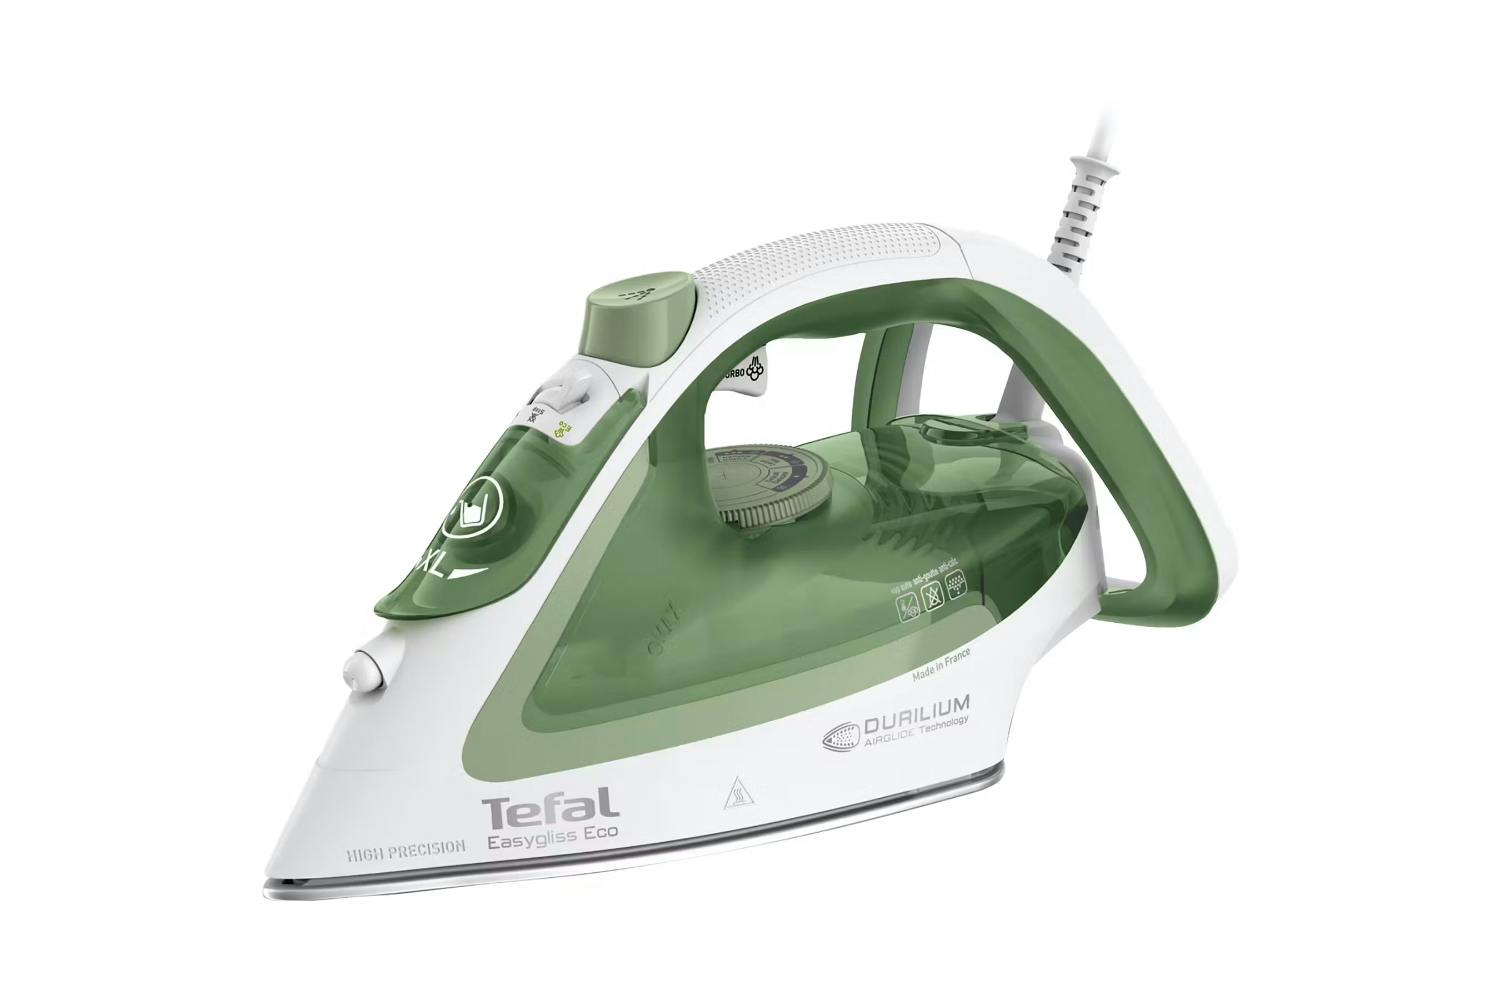 Tefal 2800W Easygliss Eco Steam Iron | FV5781G0 | White & Green